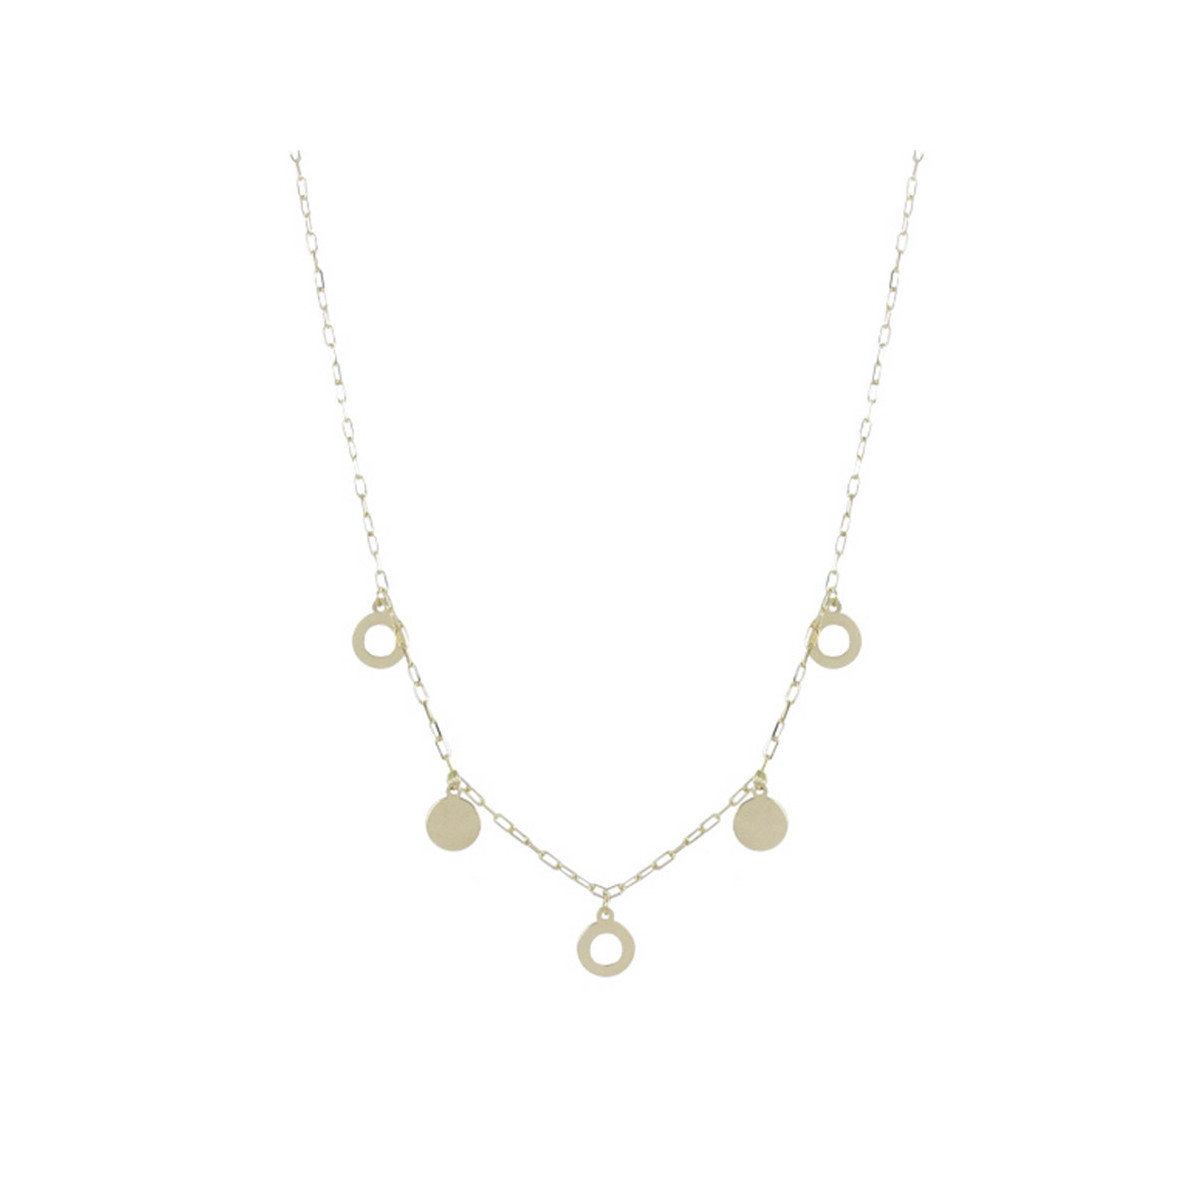 FINE YELLOW GOLD NECKLACE